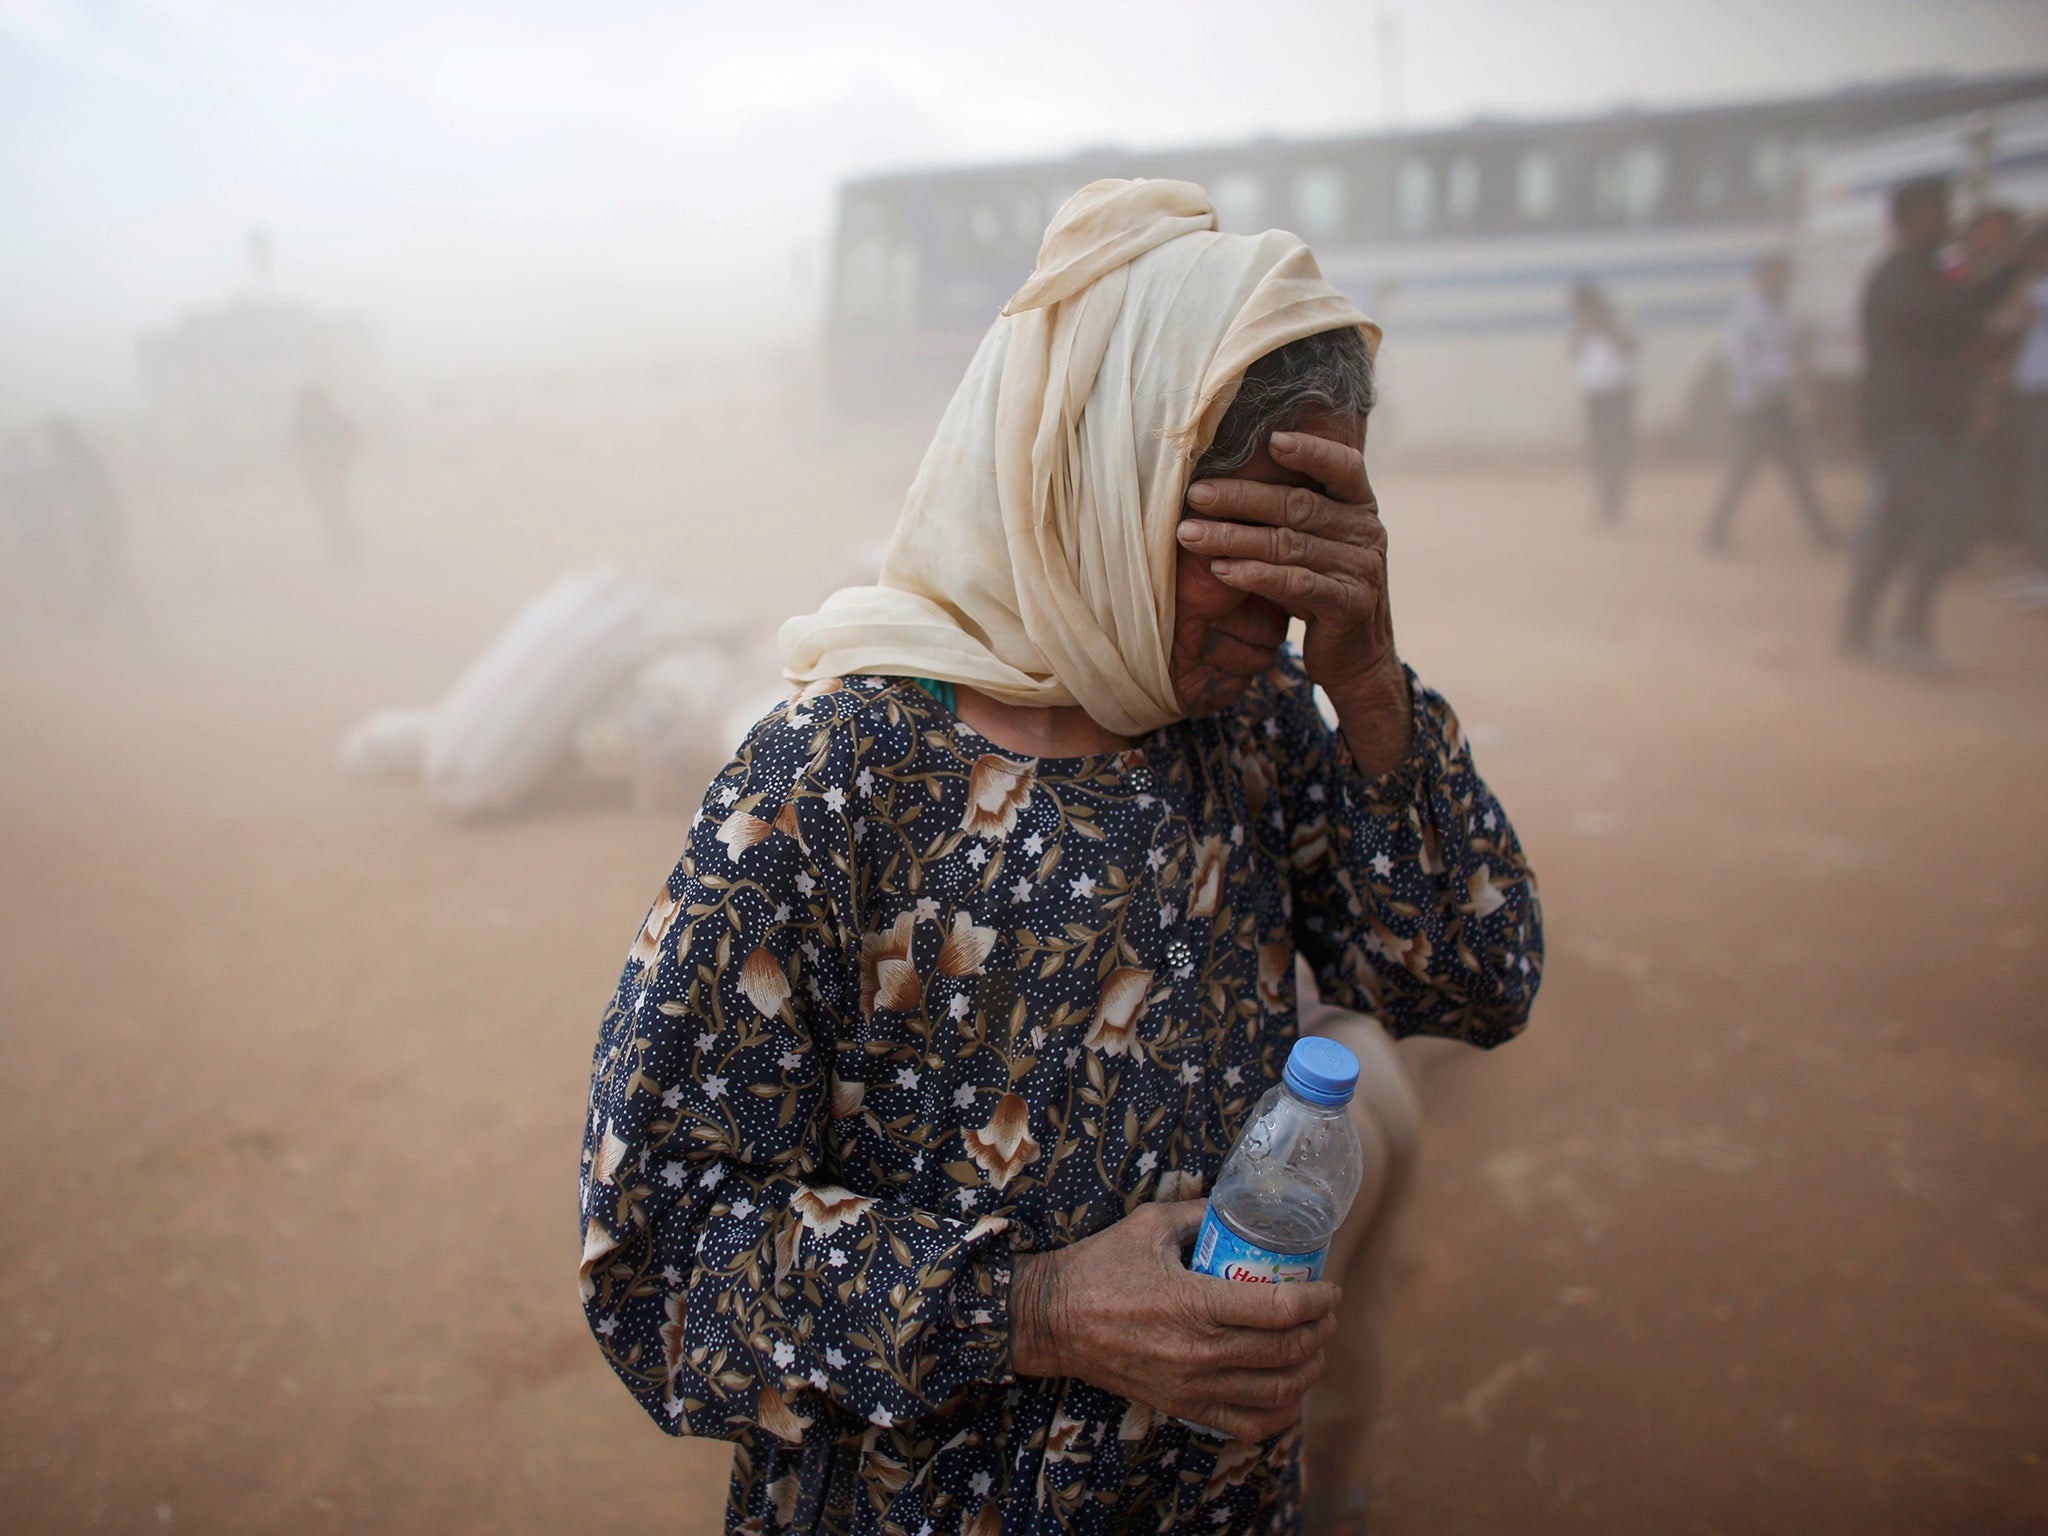 A Kurdish Syrian refugee covers her face as she waits for transport during a sand storm on the Turkish-Syrian border near the southeastern town of Suruc in Sanliurfa province